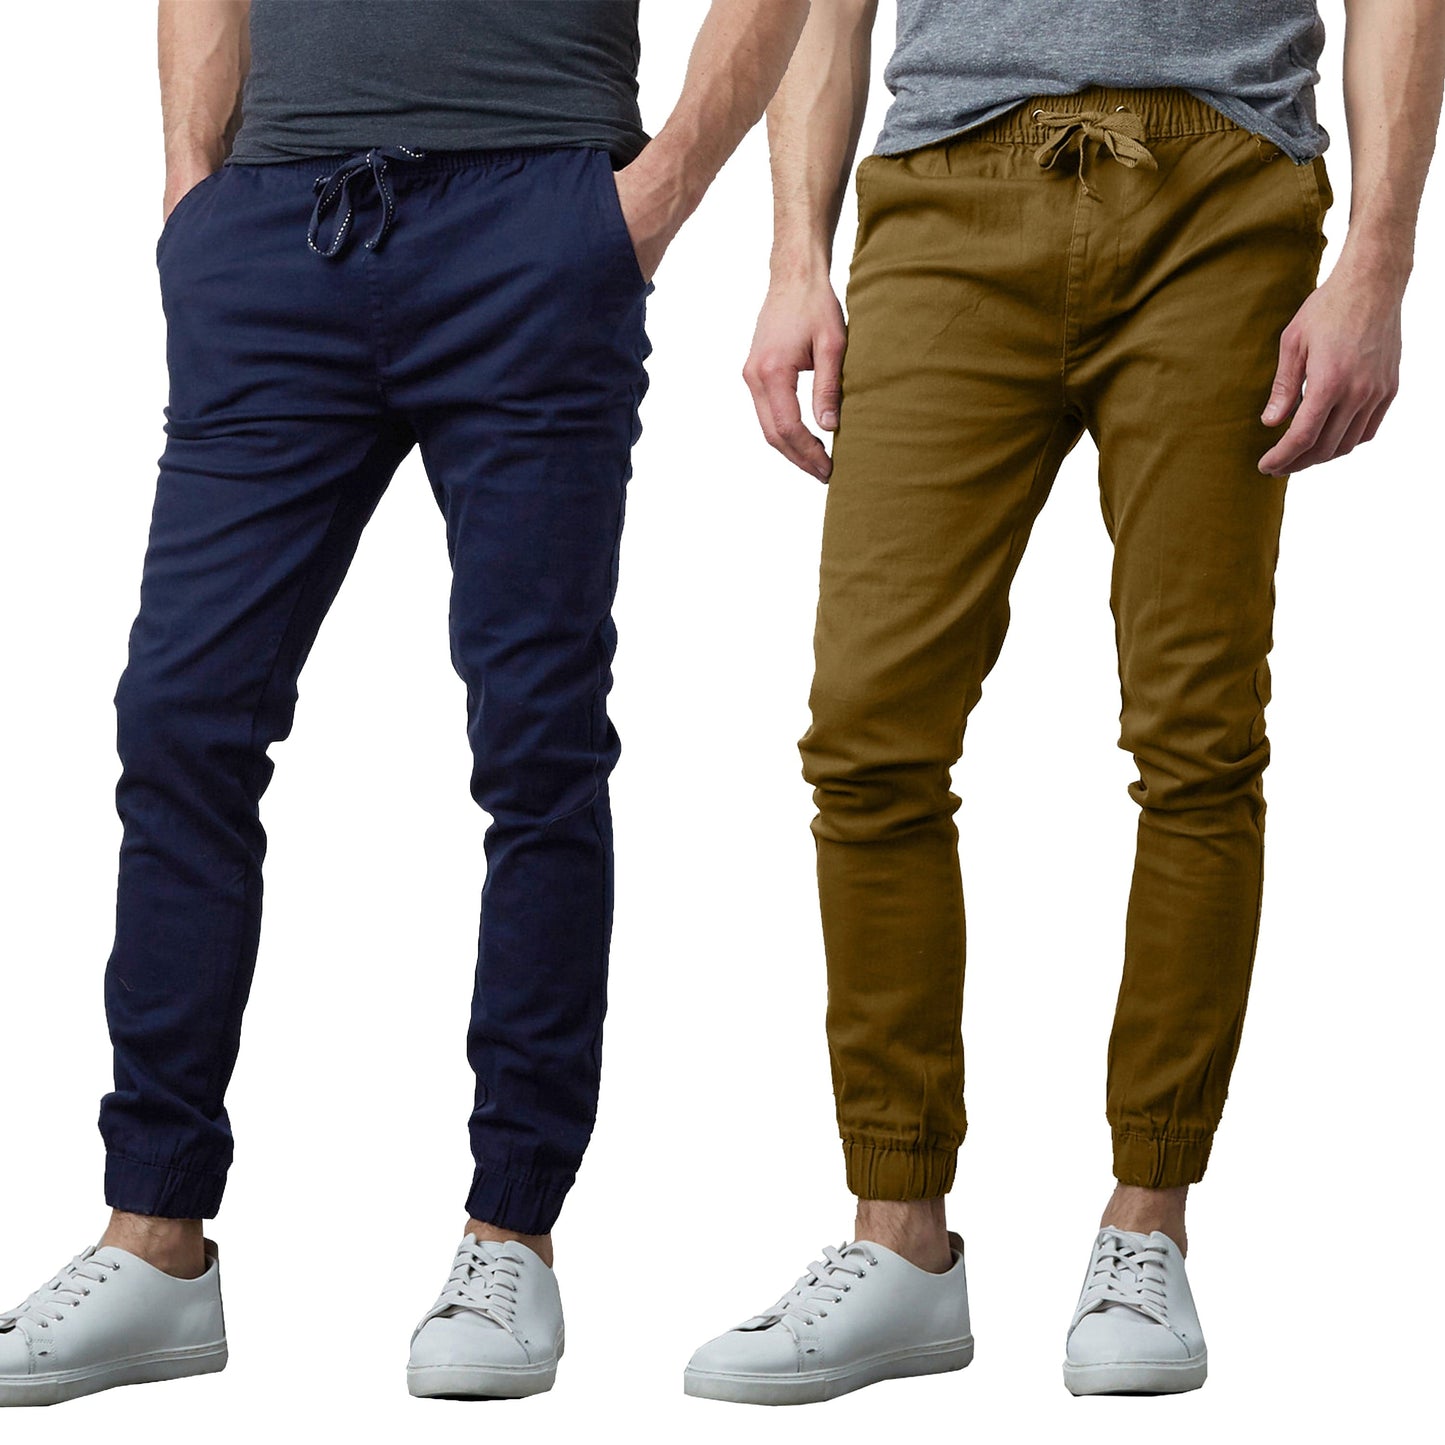 Men's 2-Pack Classic Cotton Stretch Twill Jogger Pants - GalaxybyHarvic